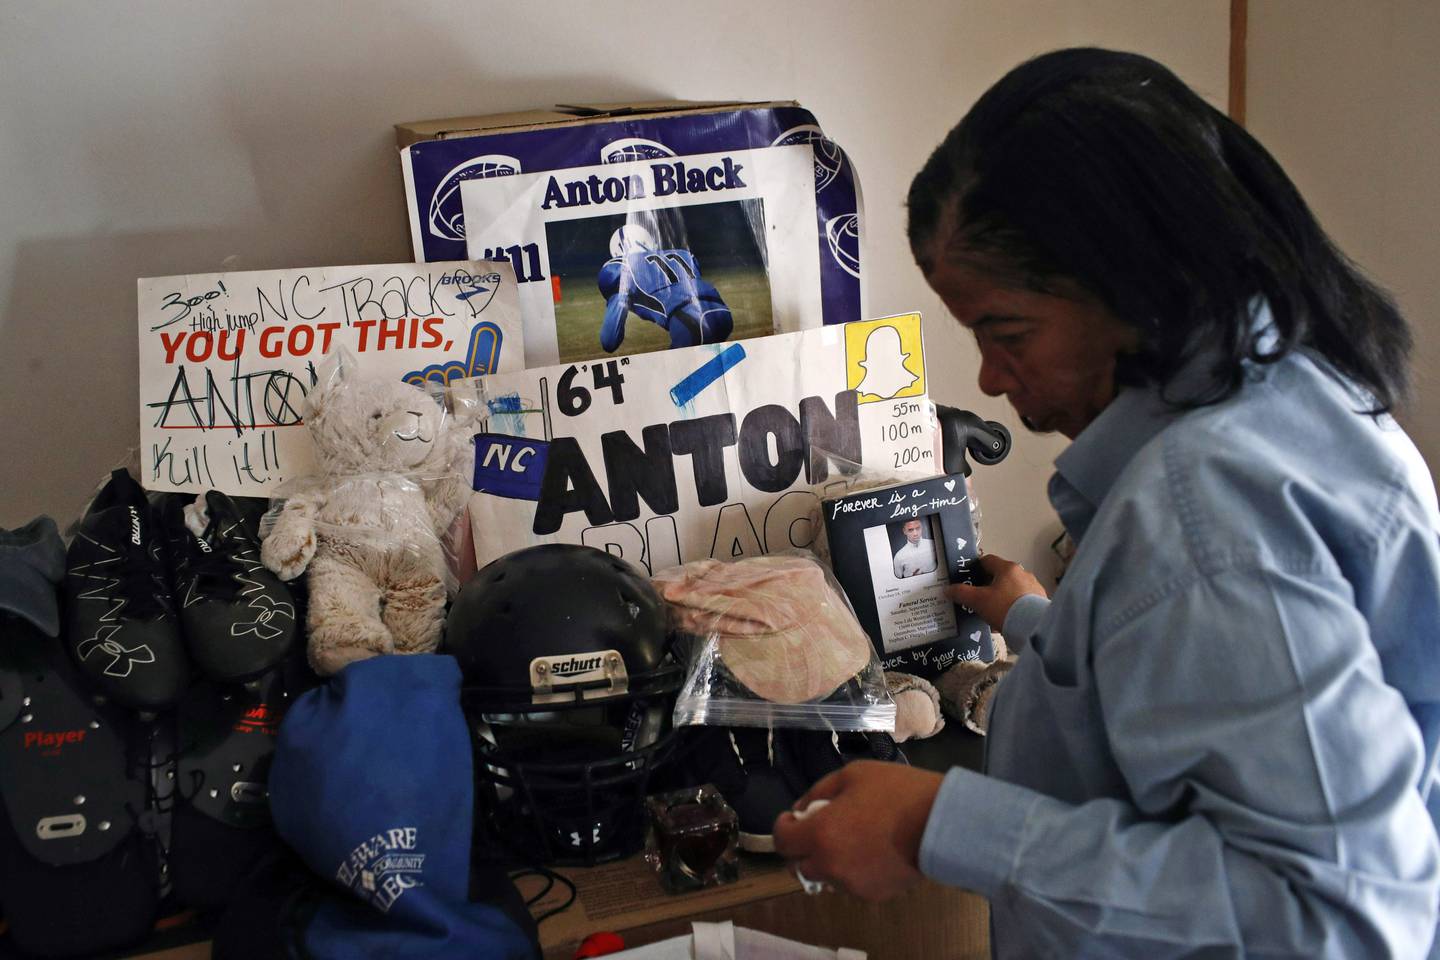 In this Jan. 28, 2019, file photo, Jennell Black, mother of Anton Black, looks at a collection of her son's belongings at her home in Greensboro, Md. Relatives of Anton Black, a 19-year-old Black man who died during a struggle with police officers on Maryland's Eastern Shore, have reached a $5 million partial settlement of their wrongful death lawsuit, an agreement that also requires improvements in police training and policies, family attorneys announced Monday, Aug. 8, 2022.